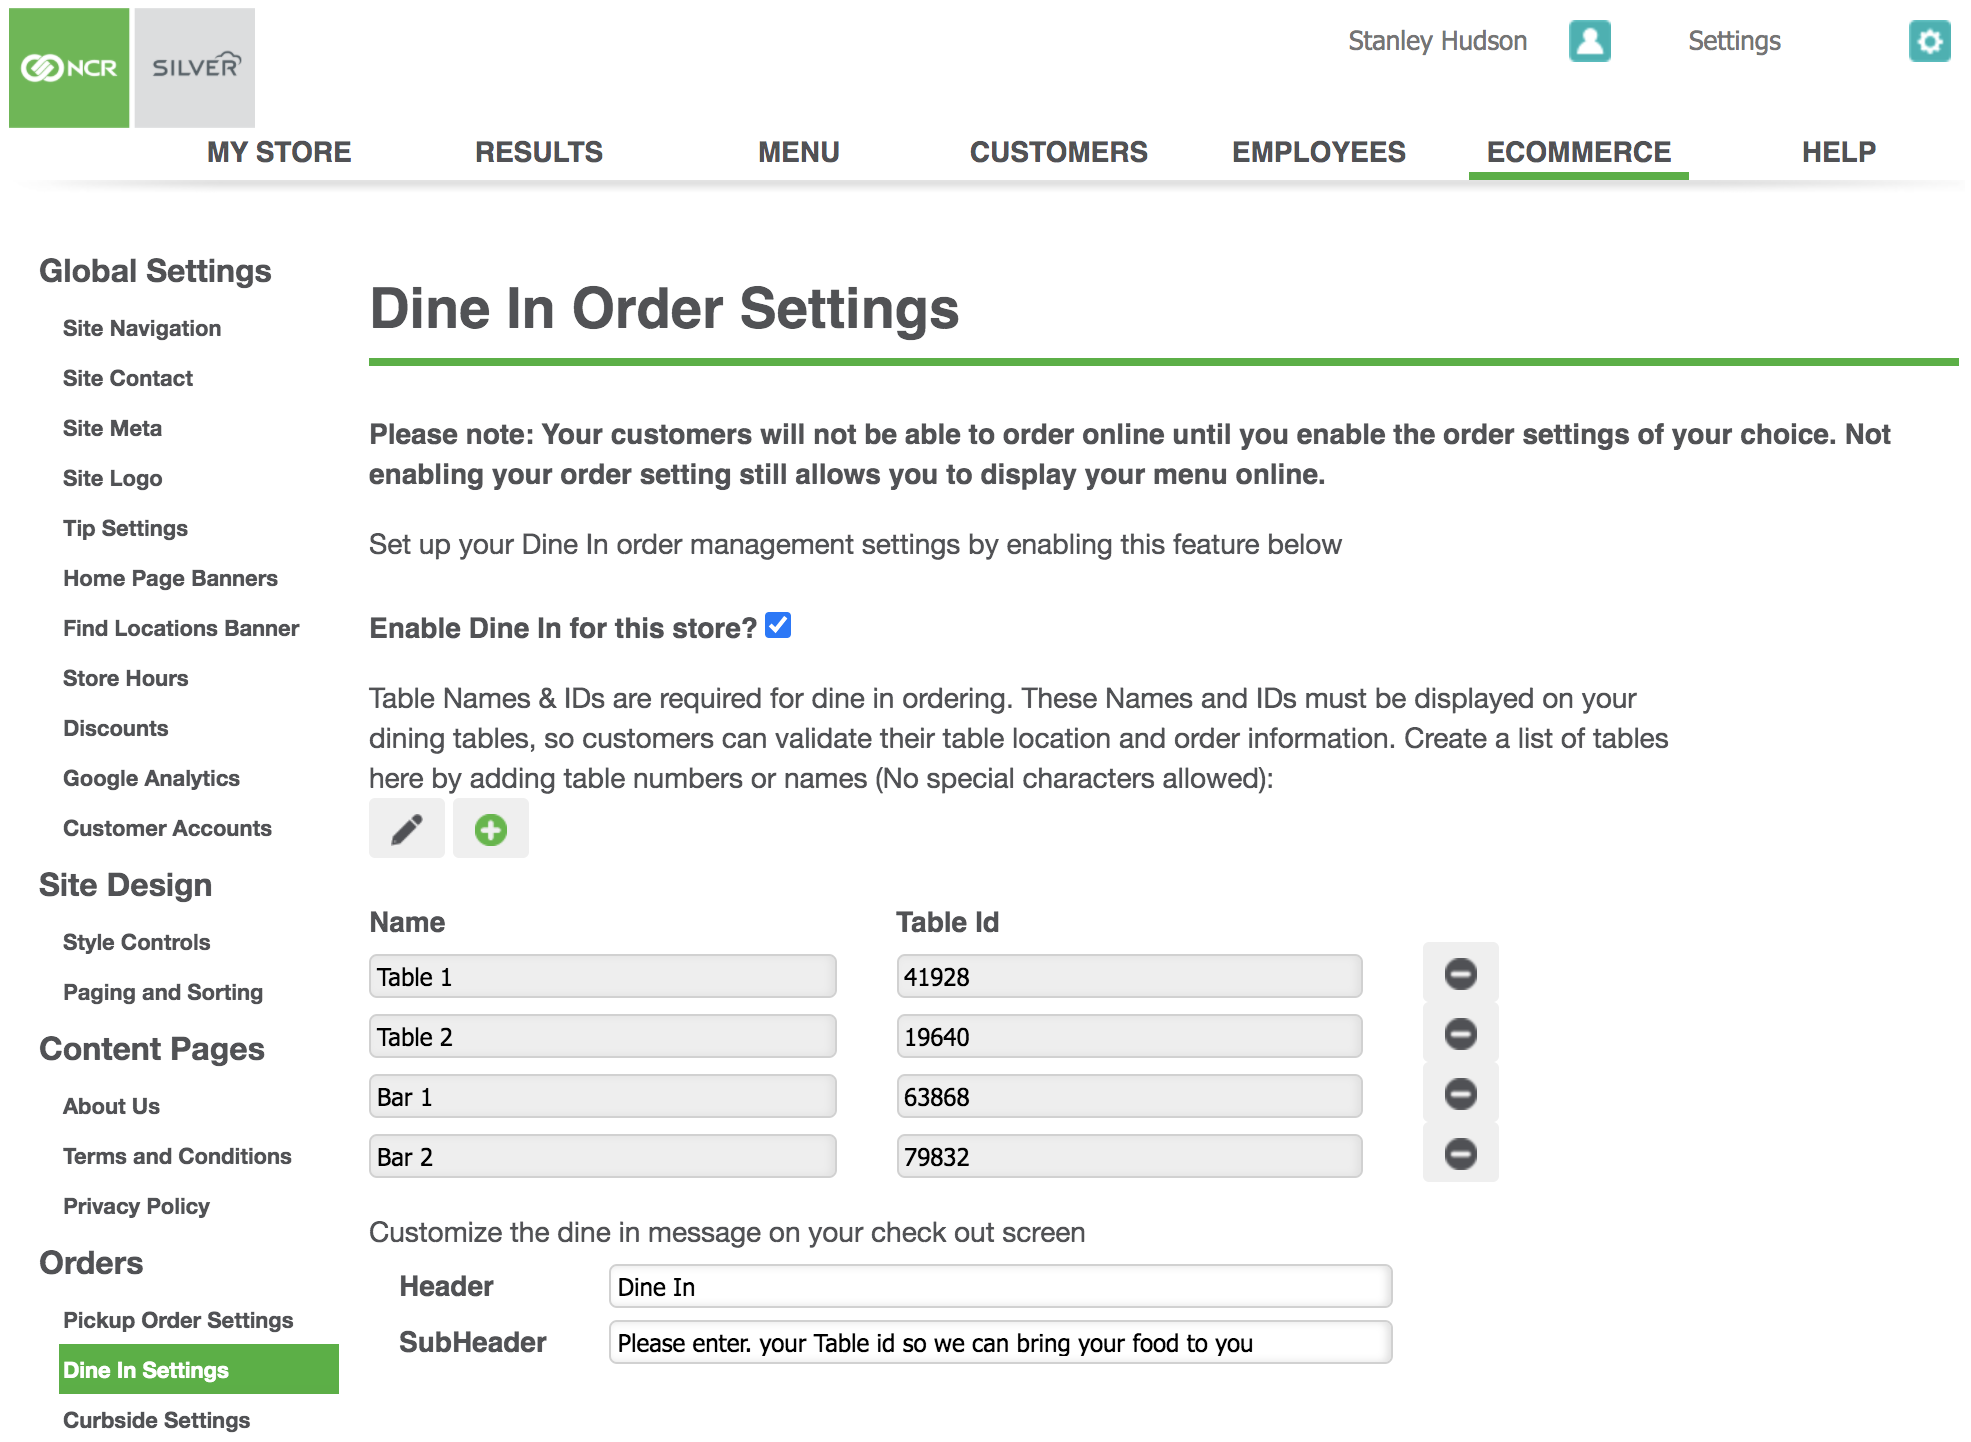 dine in order settings ncr silver